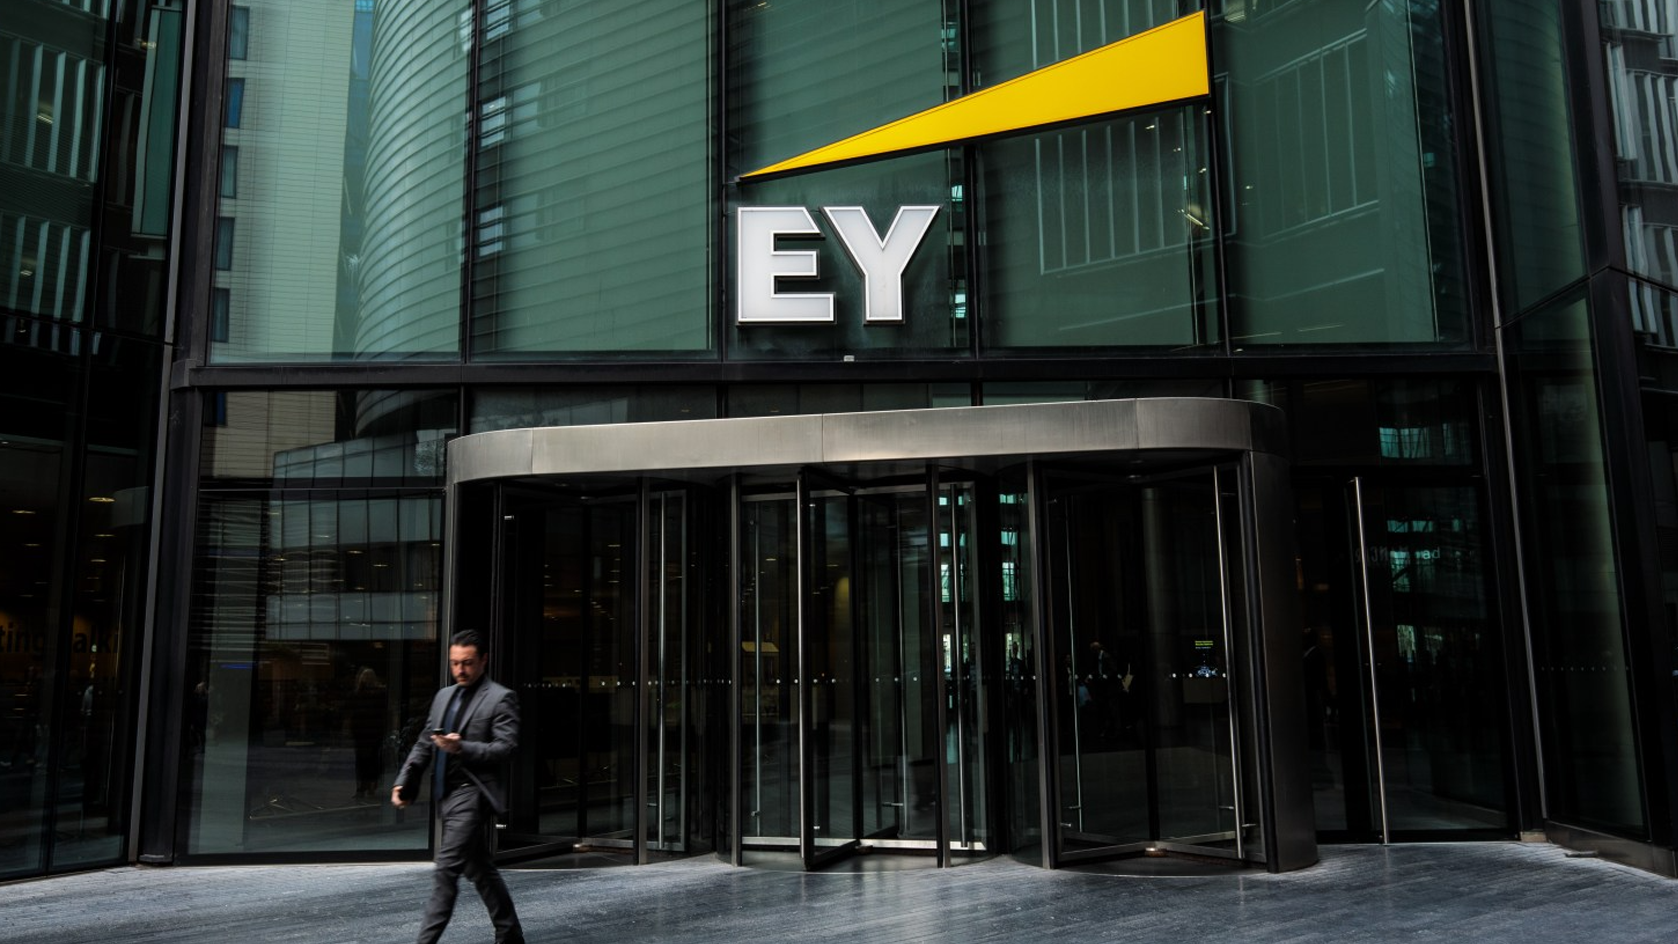 Age and Leadership: The EY Succession Debate